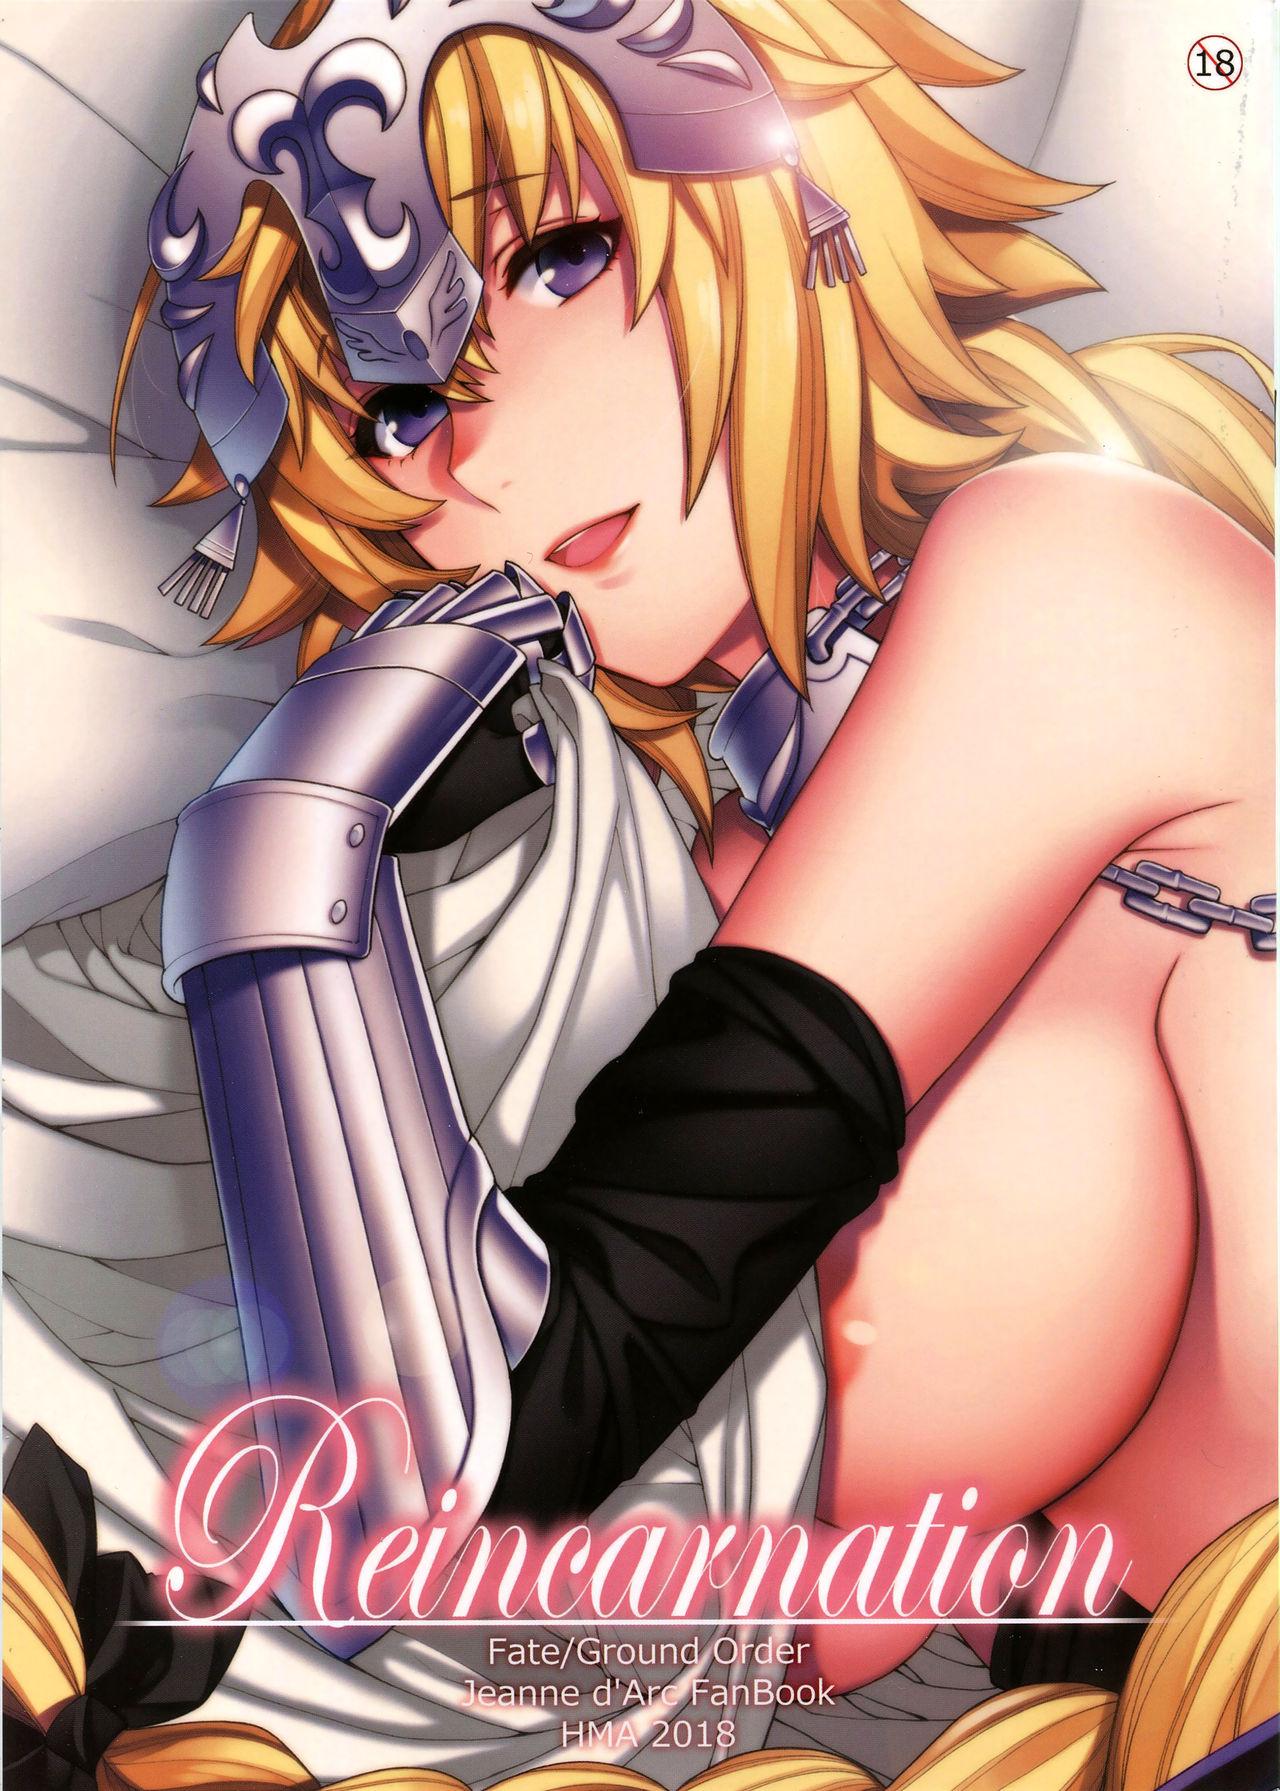 Stroking Reincarnation - Fate grand order Huge Boobs - Page 1